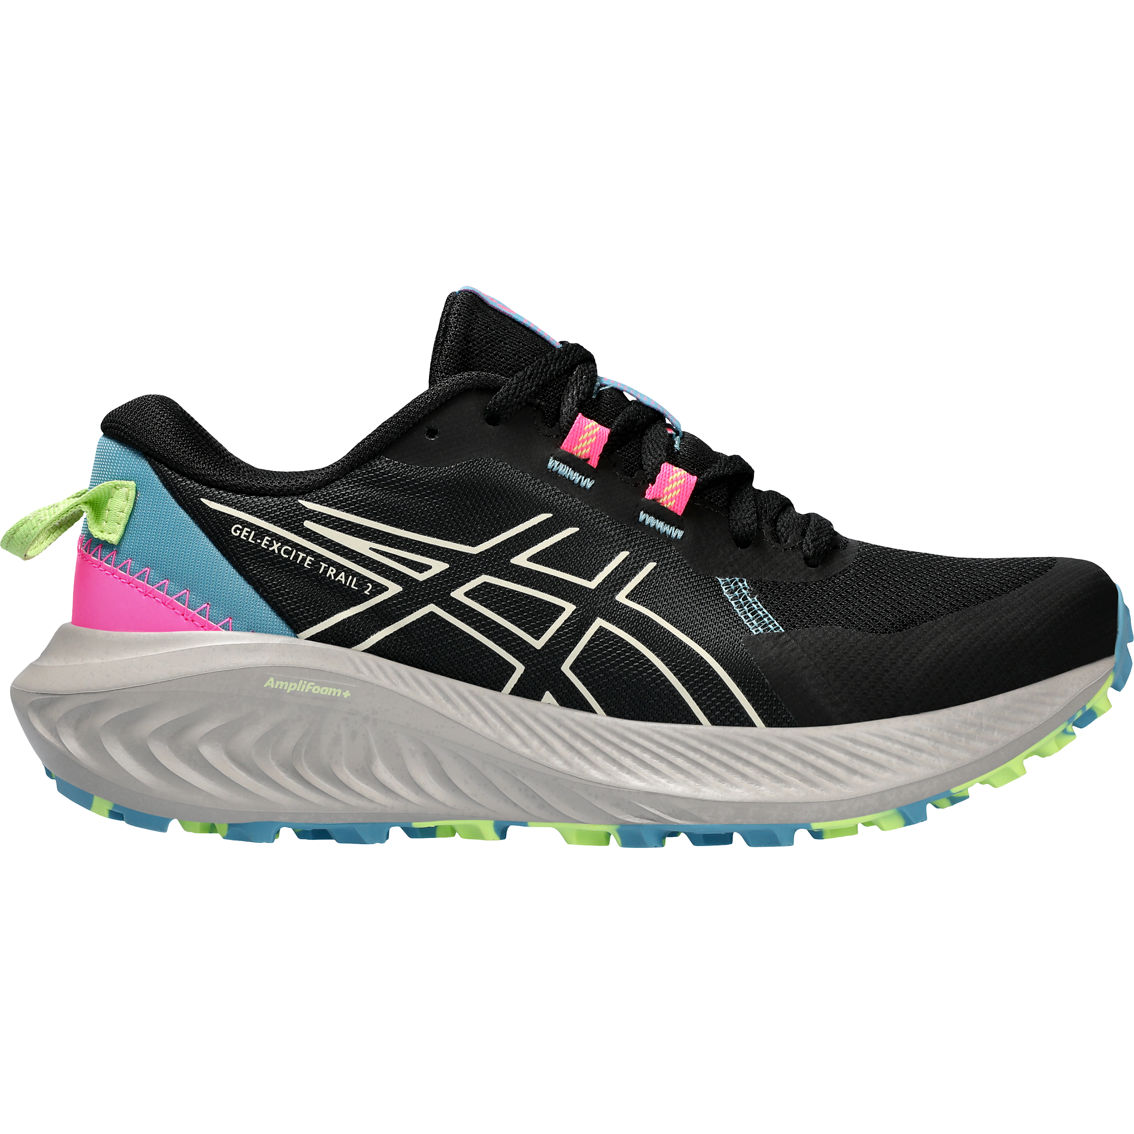 ASICS Women's GEL-Excite Trail 2 Trail Running Shoes - Image 2 of 7